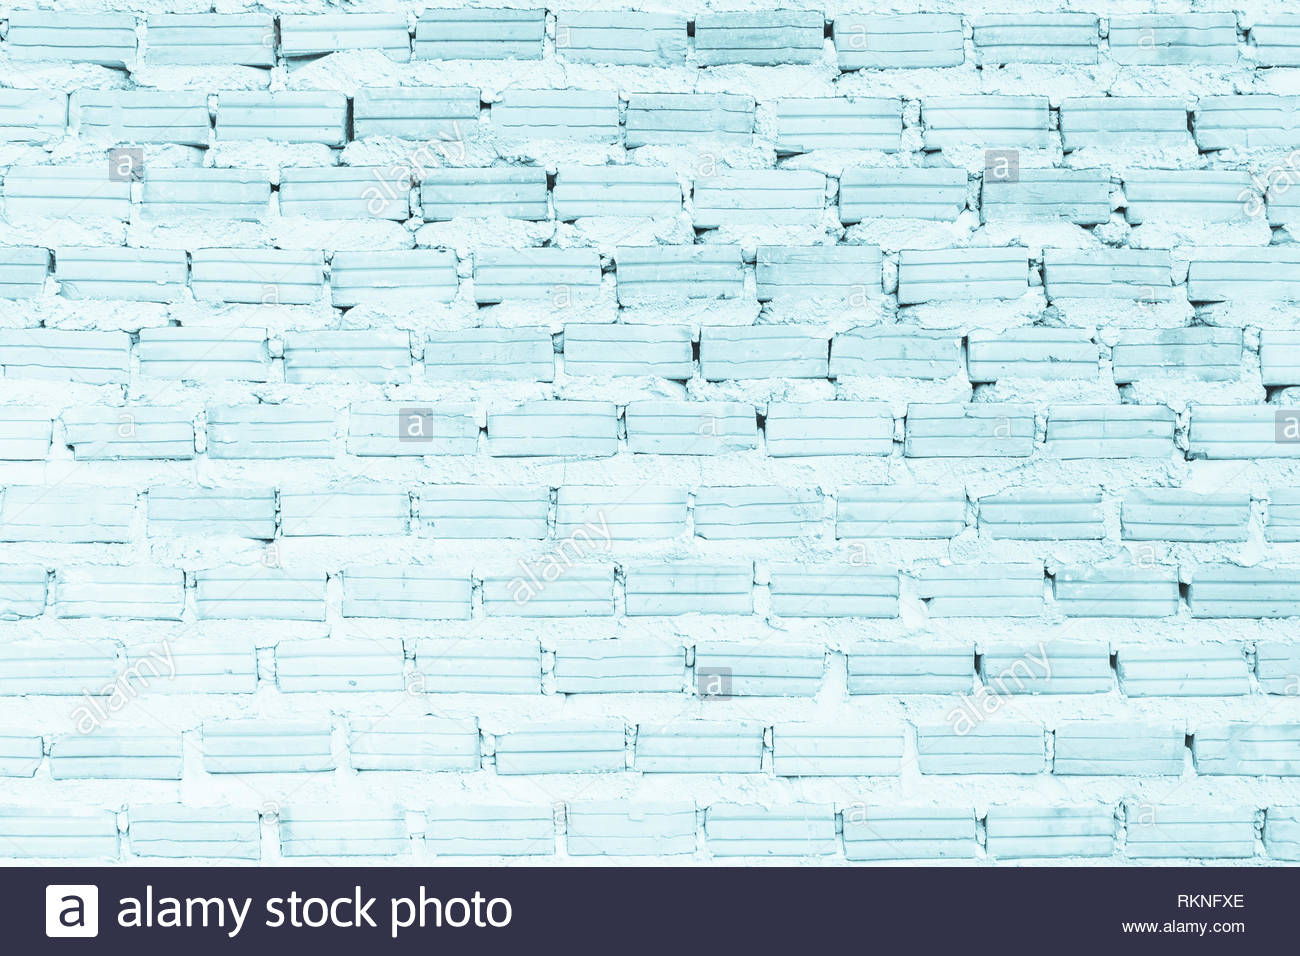 Blue Brick Wall Antique Texture Background Abstract Brickwork Or